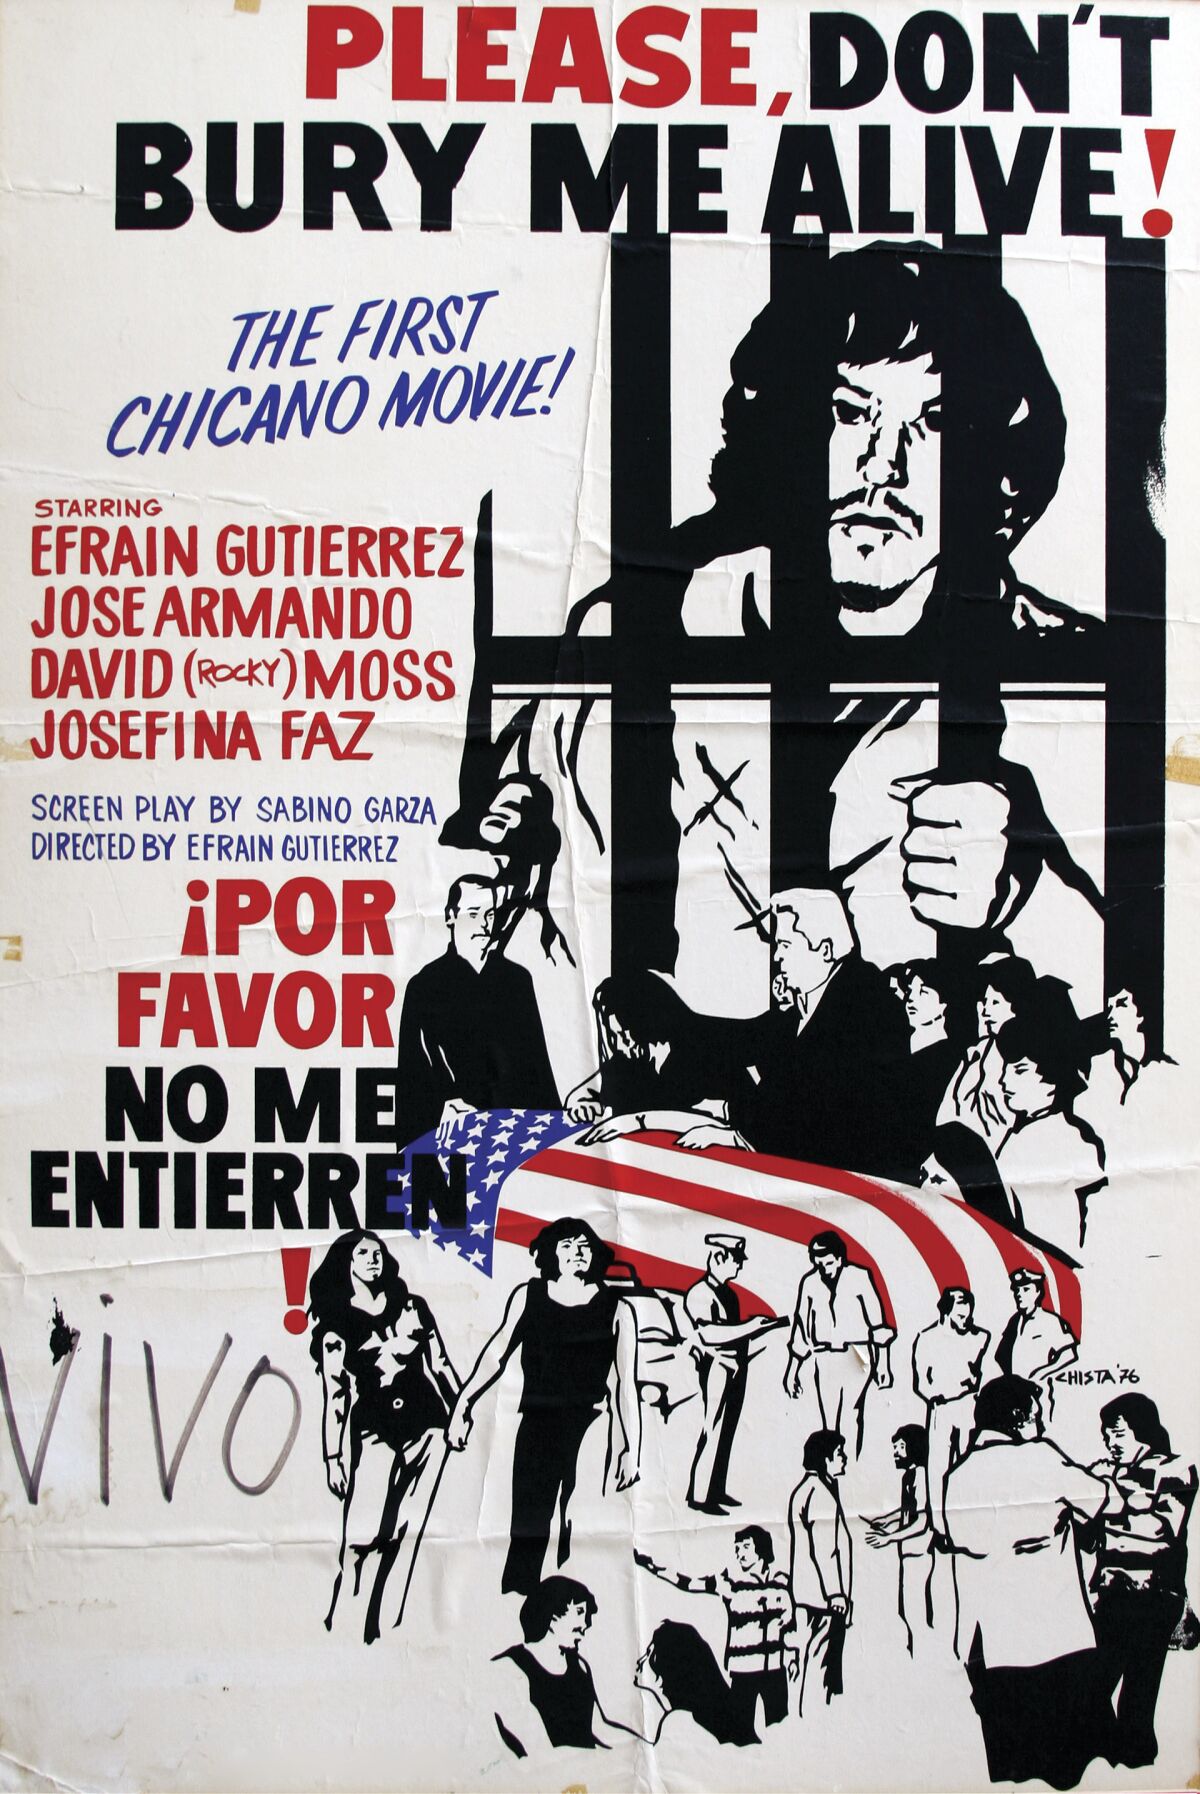 A black and white poster features a collage of images: a couple holding hands, a man in jail and a flag-covered coffin